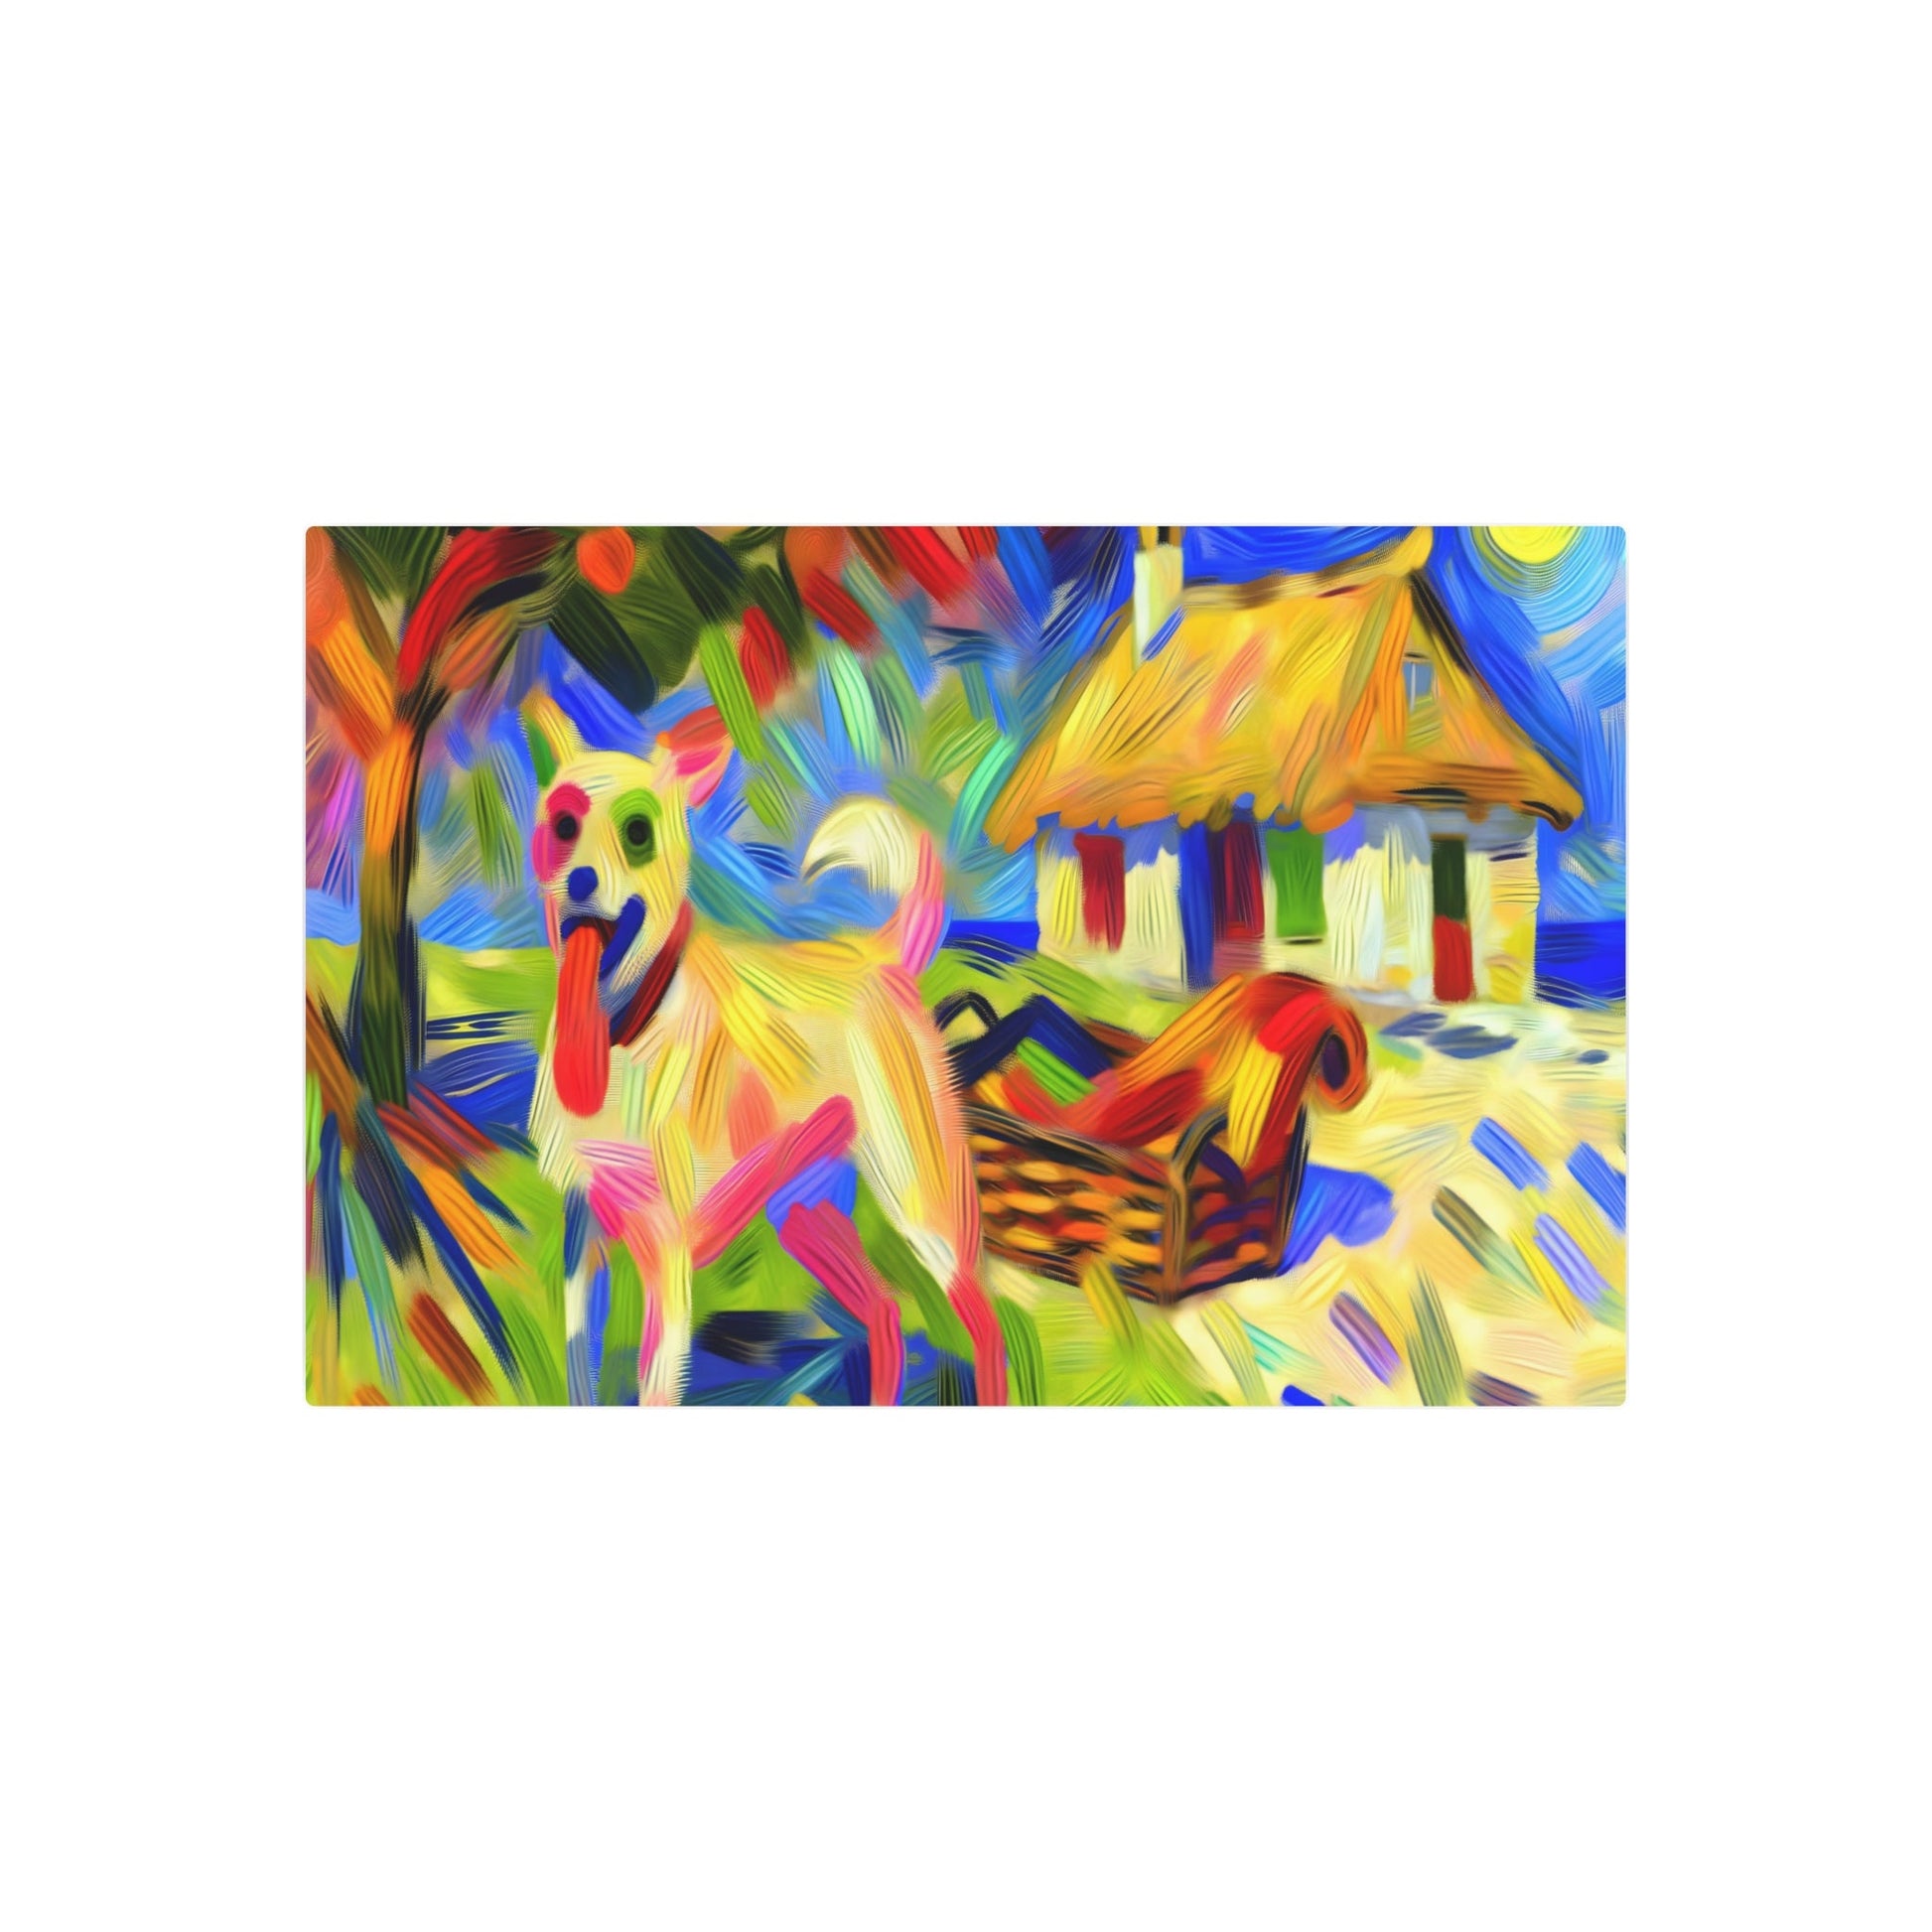 Metal Poster Art | "Post-Impressionist Western Art Style - Lively and Colorful Dog Scene Painting" - Metal Poster Art 36″ x 24″ (Horizontal) 0.12''